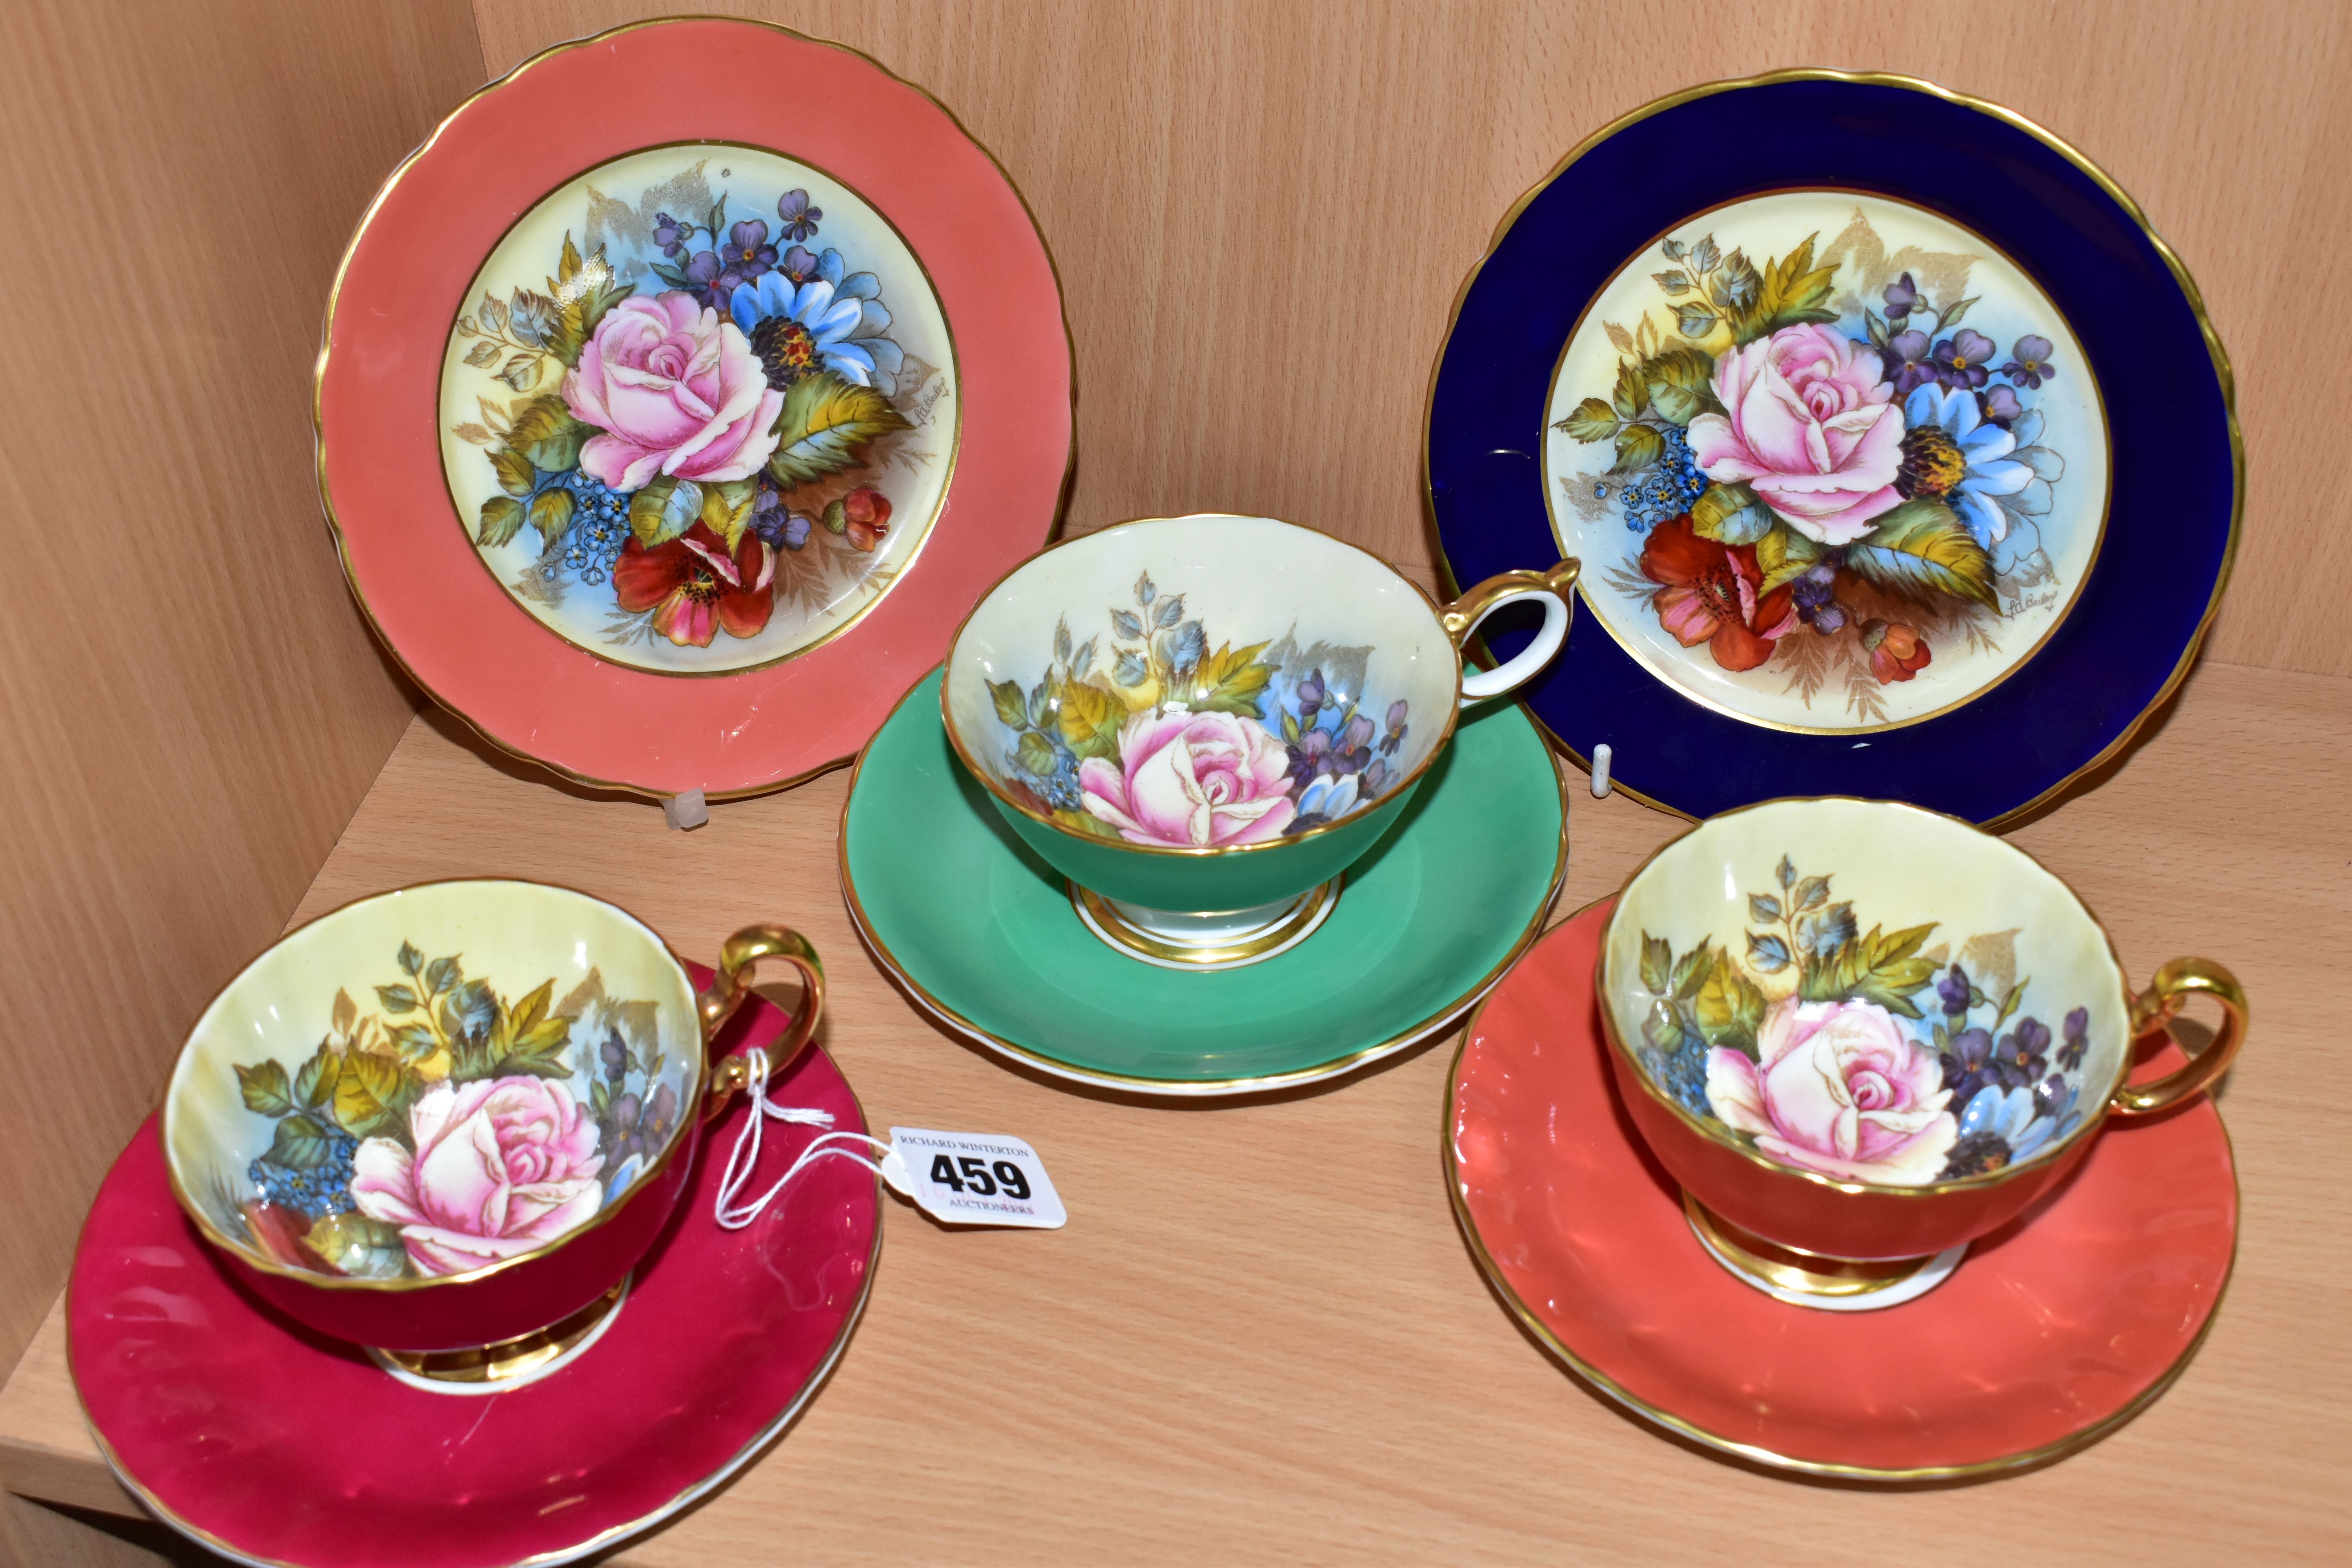 THREE AYNSLEY FLORAL DECORATED TEA CUPS AND SAUCERS BY J. A. BAILEY, with two tea plates, wavy rims,